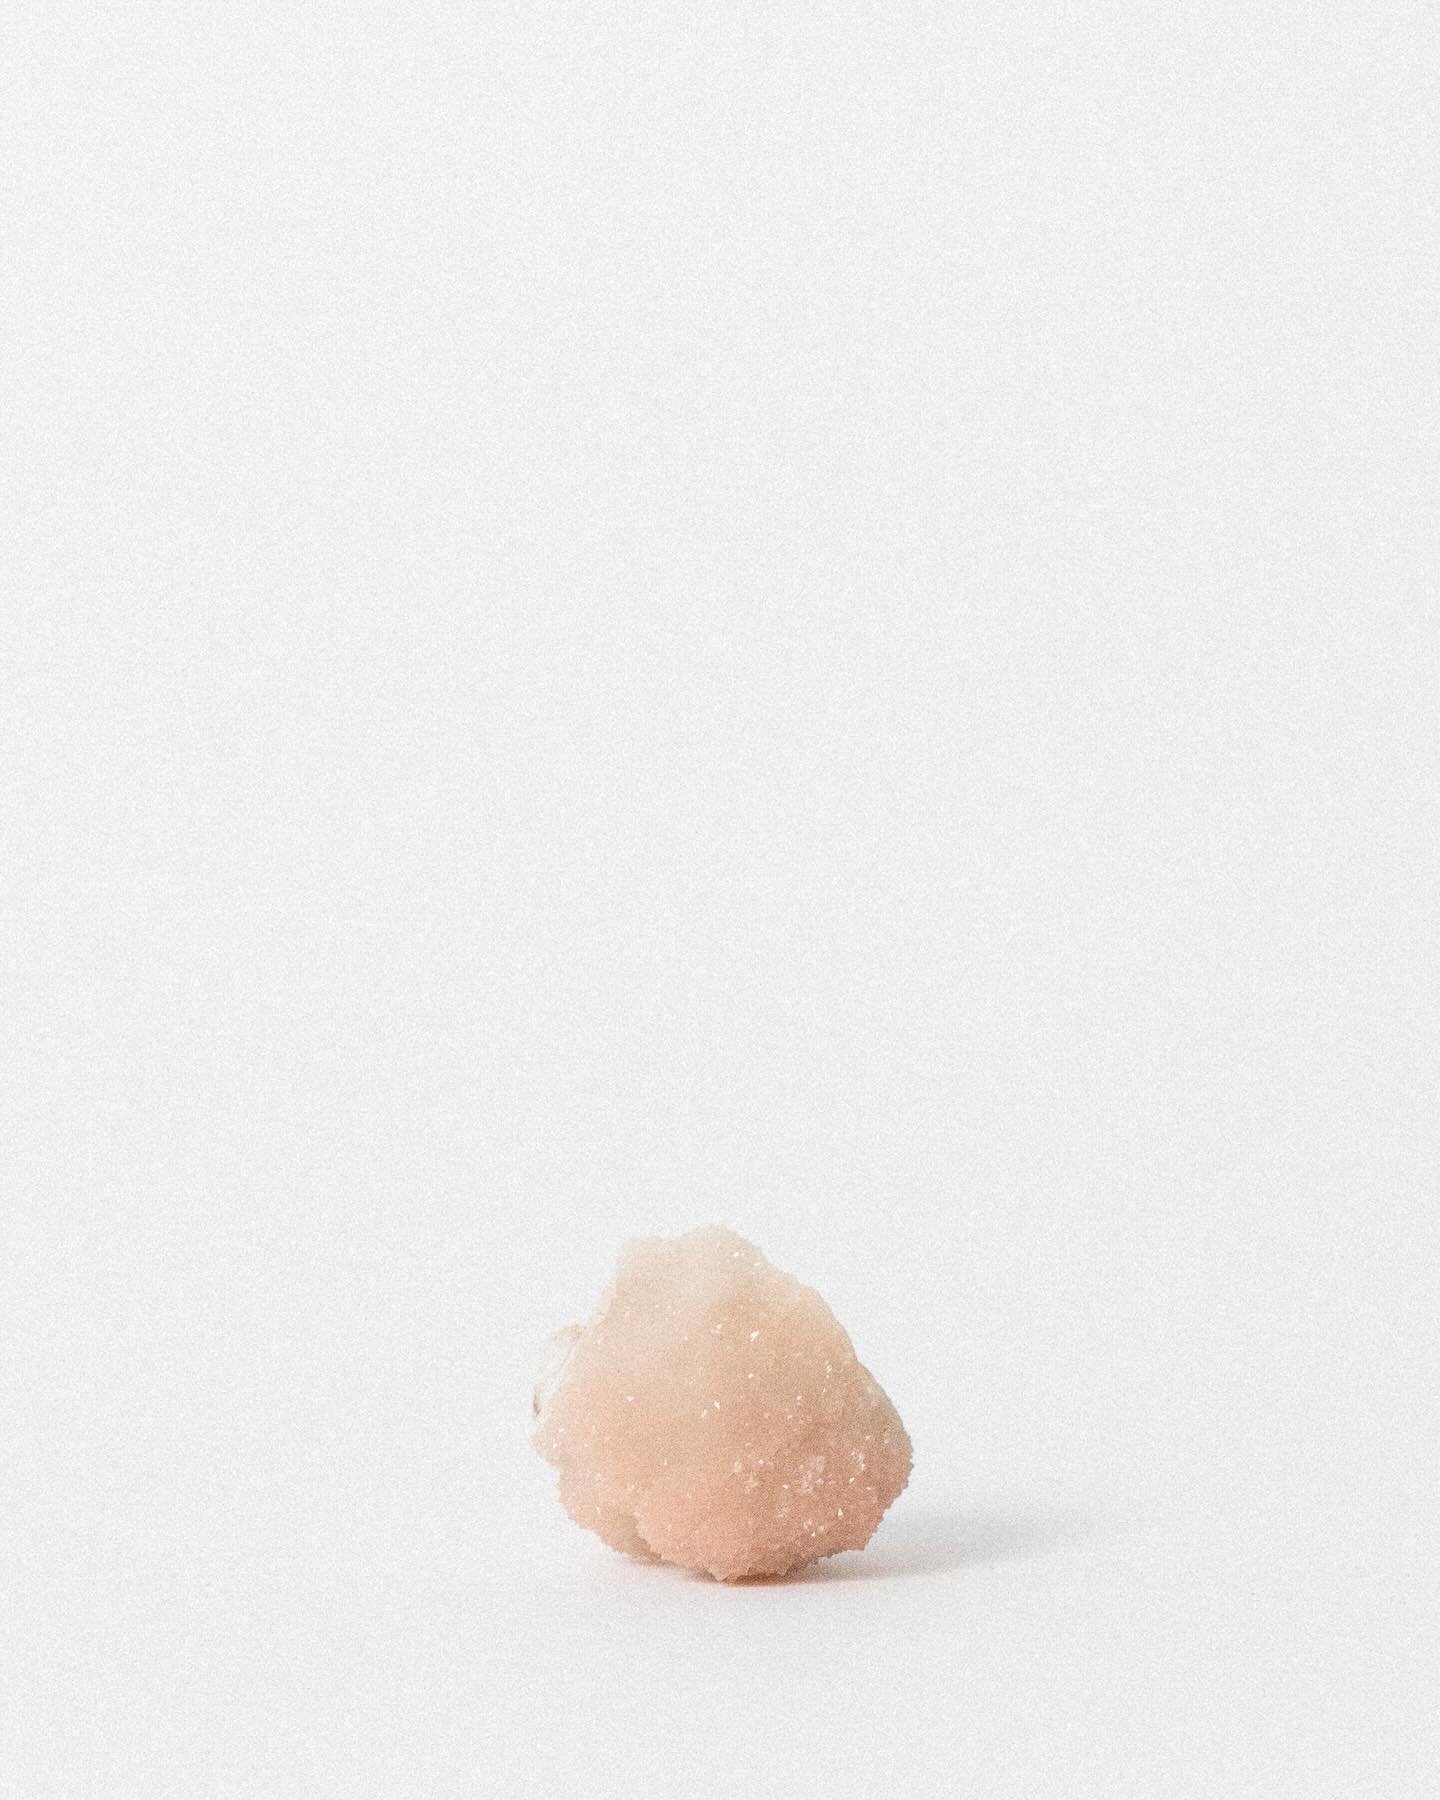 In the Shop &mdash; This adorable little peach cloud is composed of druzy quartz, which is when tiny quartz crystals form on the surface of another stone. When a layer of druzy quartz grows, it looks like a stone has been sprinkled with sparkly sugar